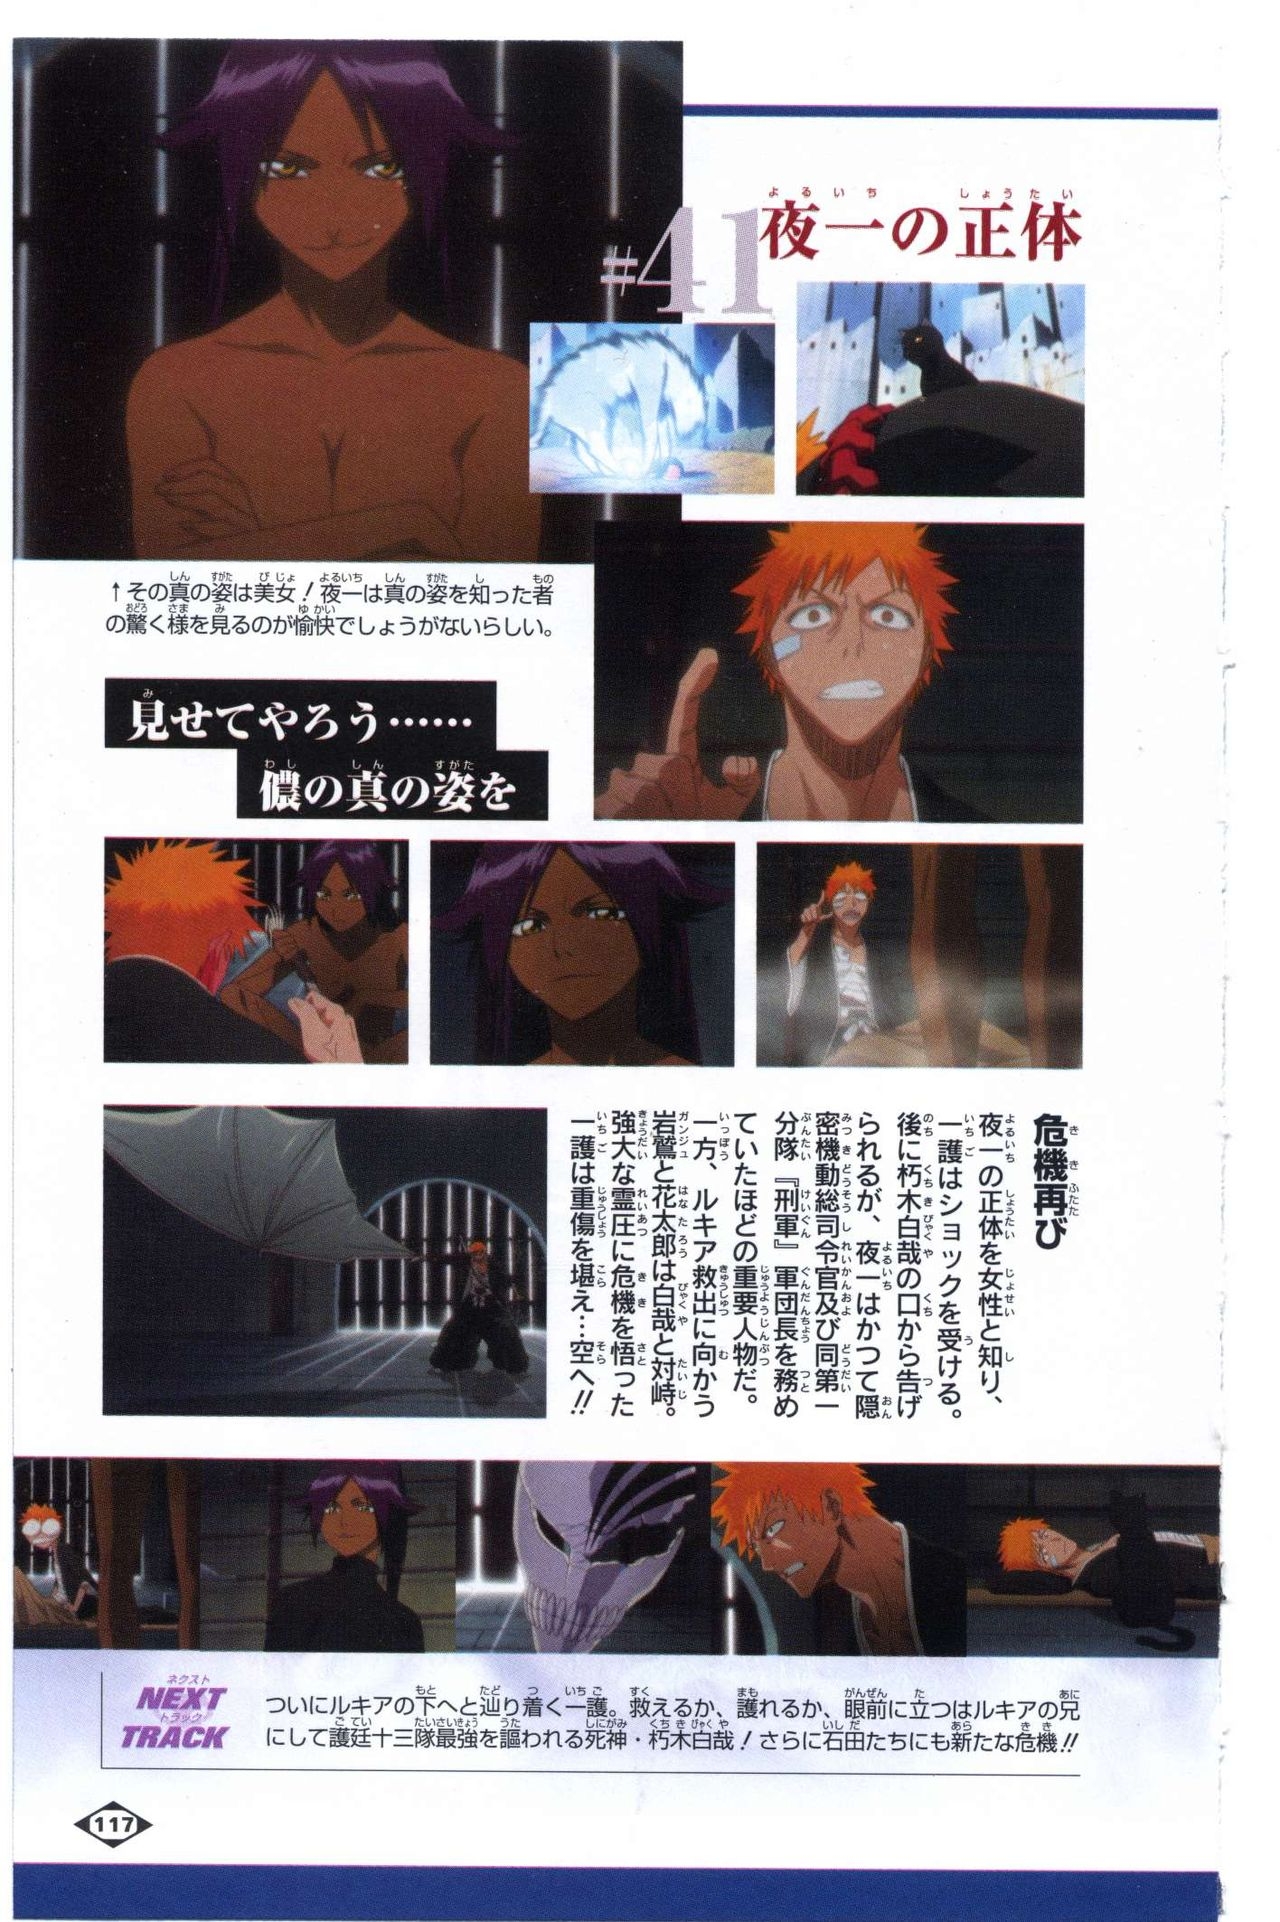 Bleach: Official Animation Book VIBEs 117